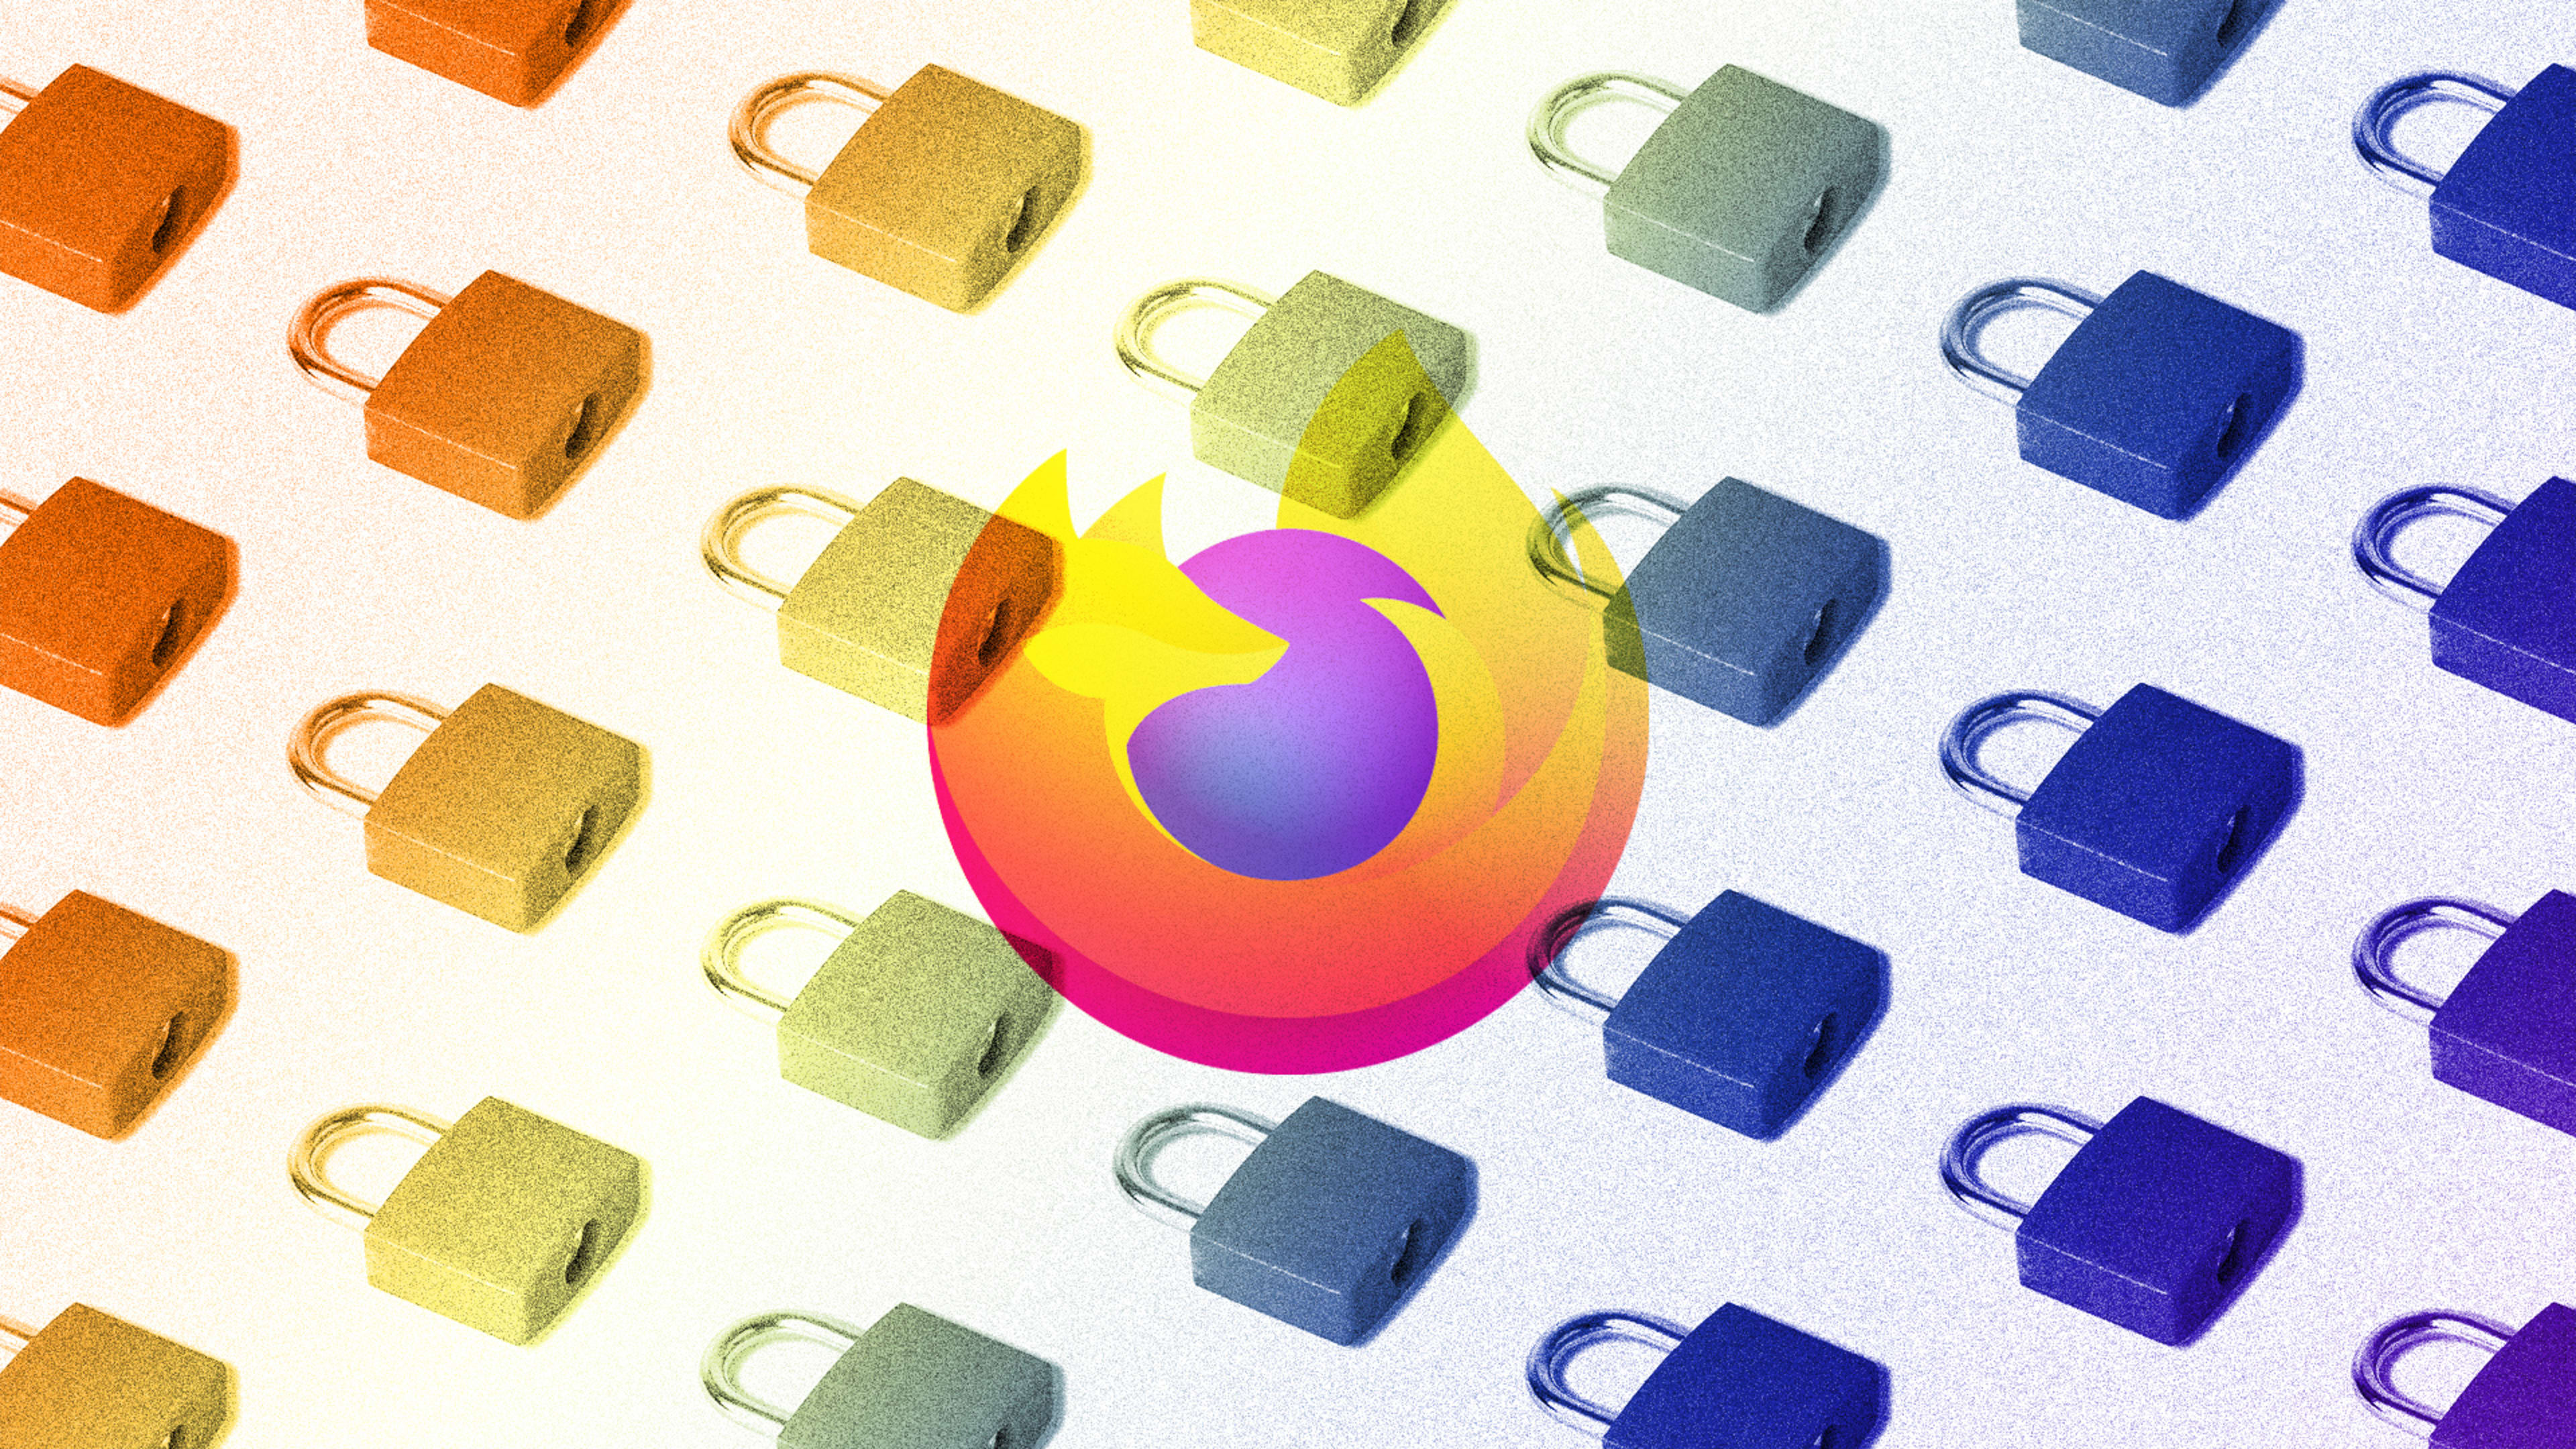 Switching from Chrome to Firefox can supercharge your privacy in minutes